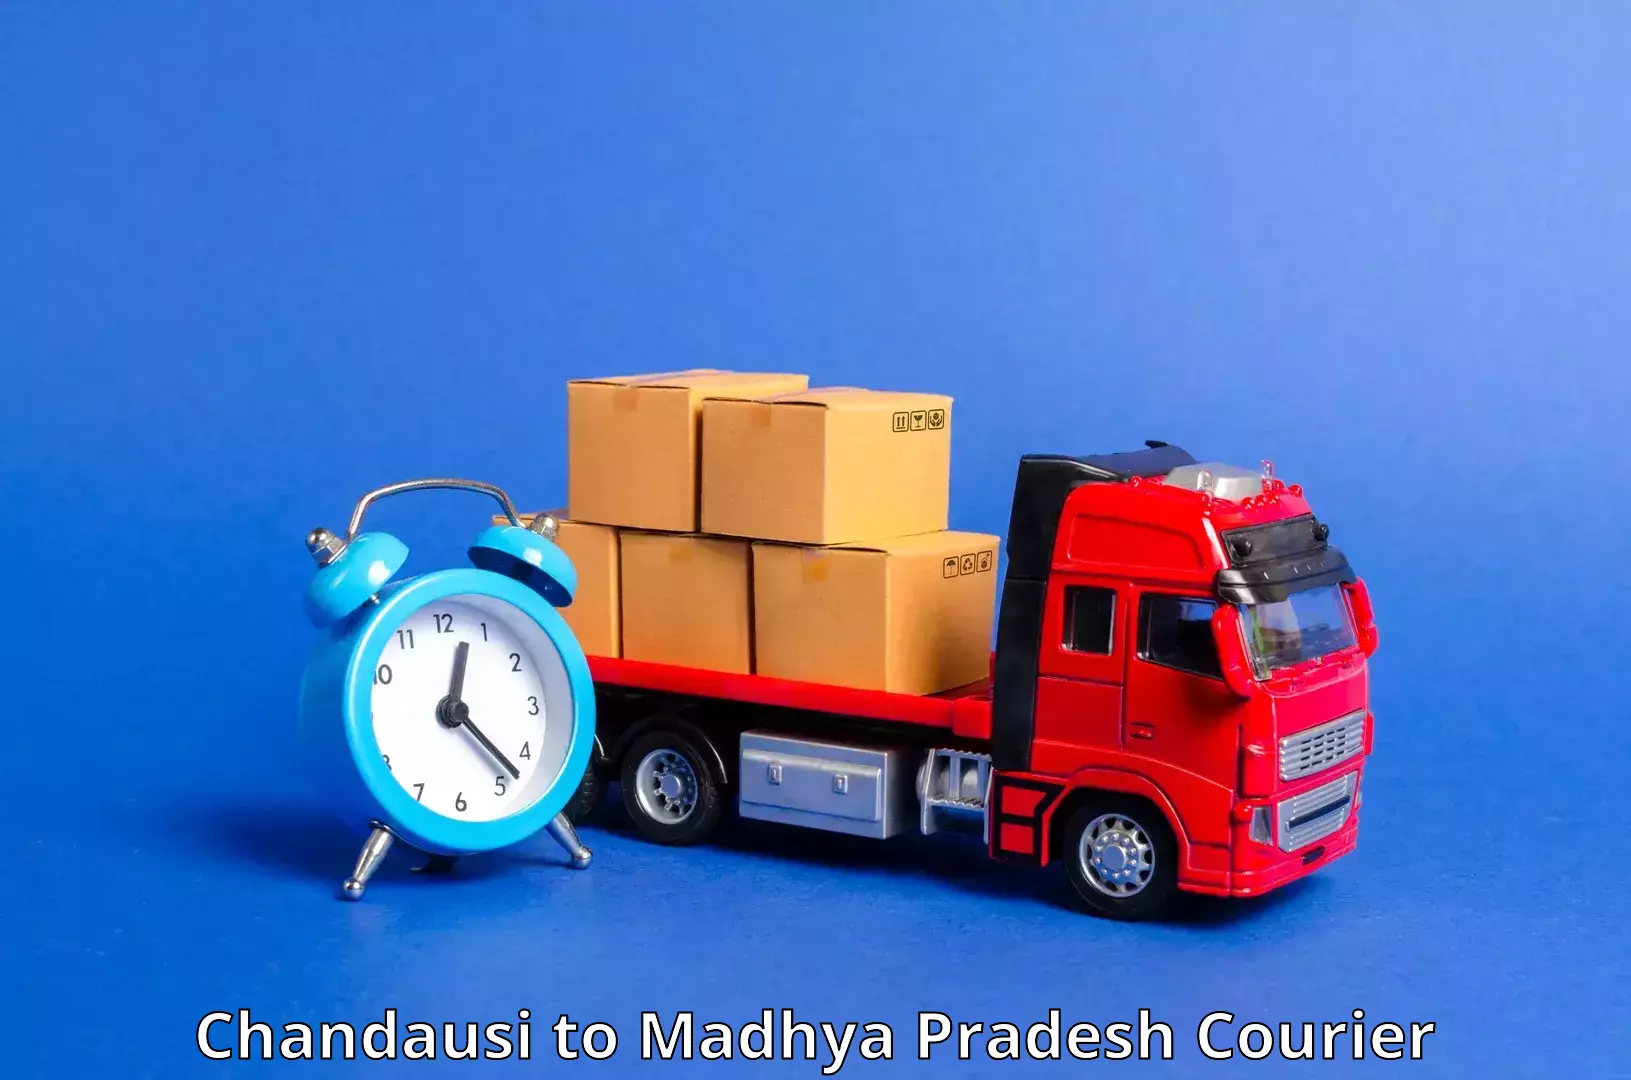 Package delivery network Chandausi to Ujjain